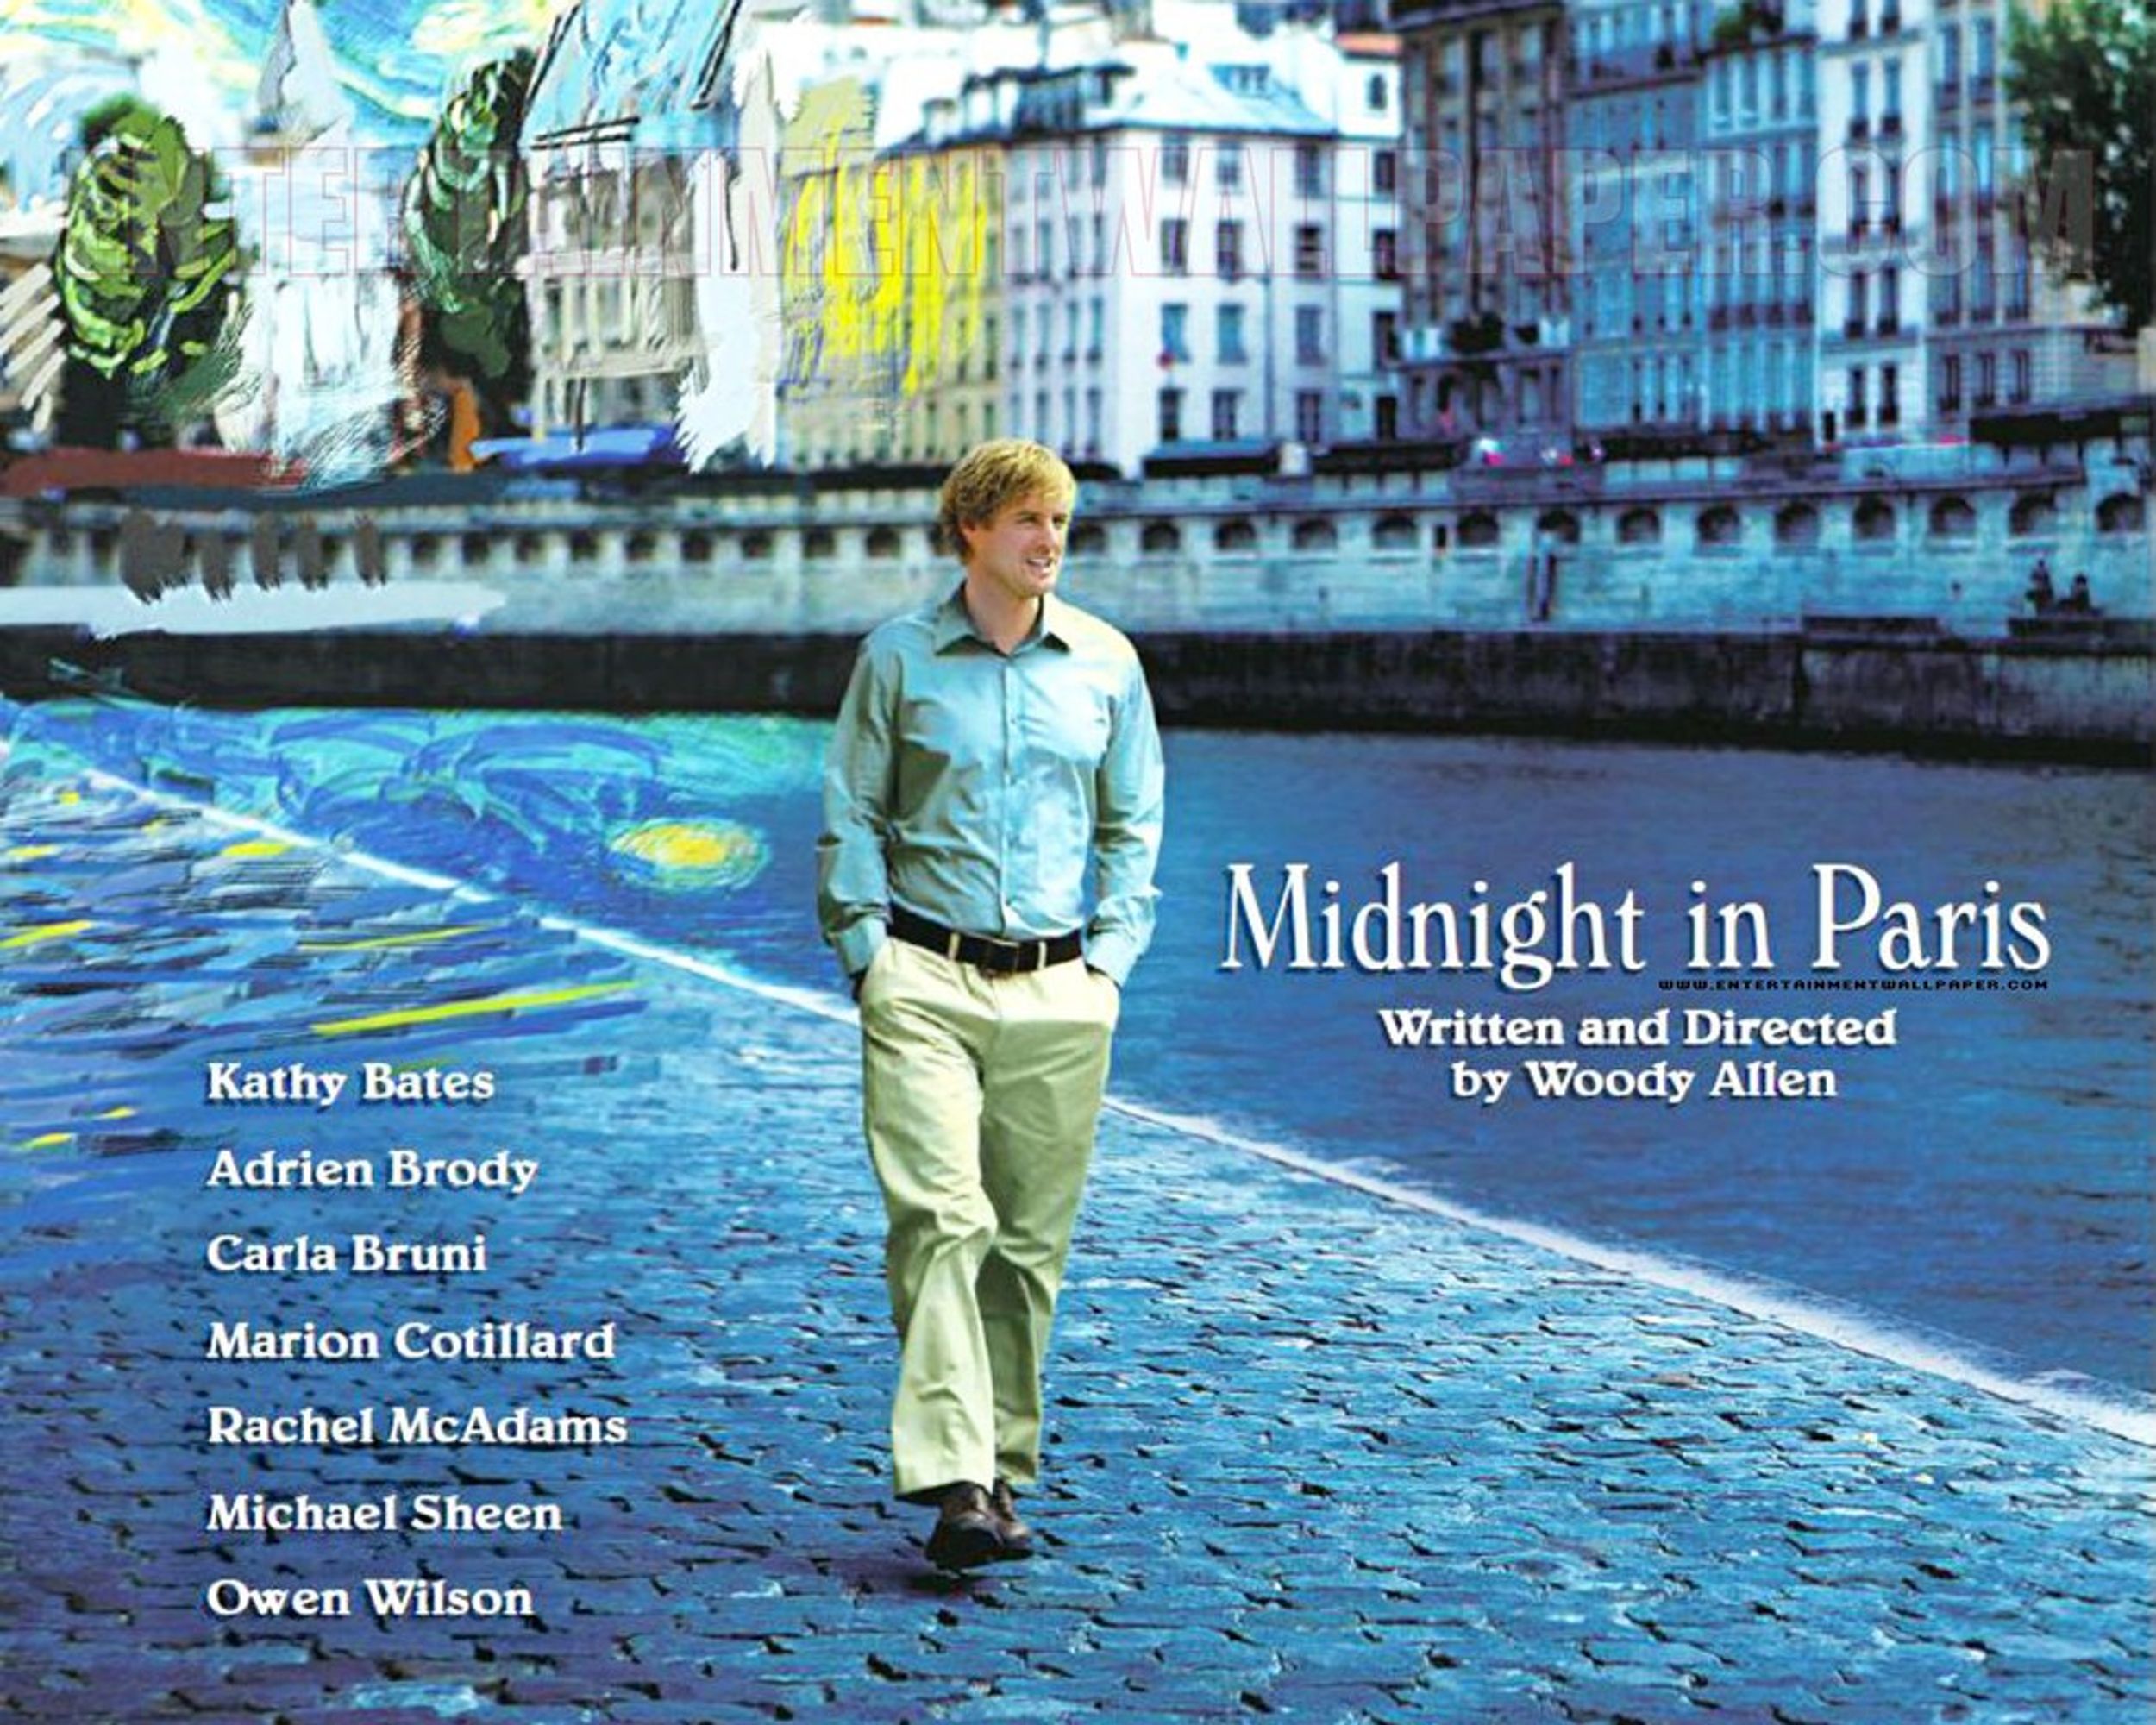 A Critique Of 'Midnight In Paris' From The Perspective Of Modern Speculative Fiction